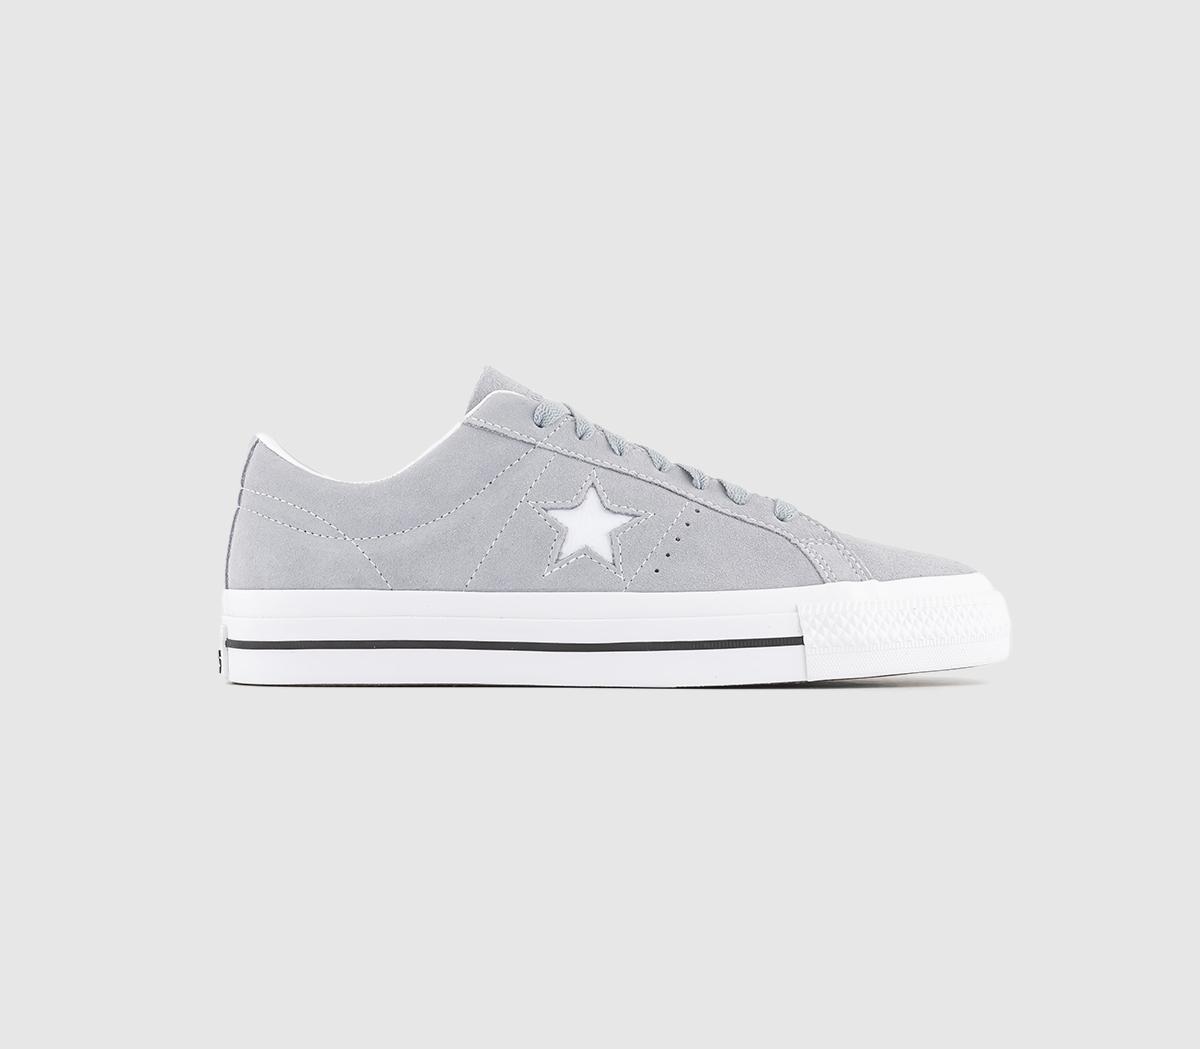 Converse One Star Pro Trainers Wolf Grey White Black Suede, 7